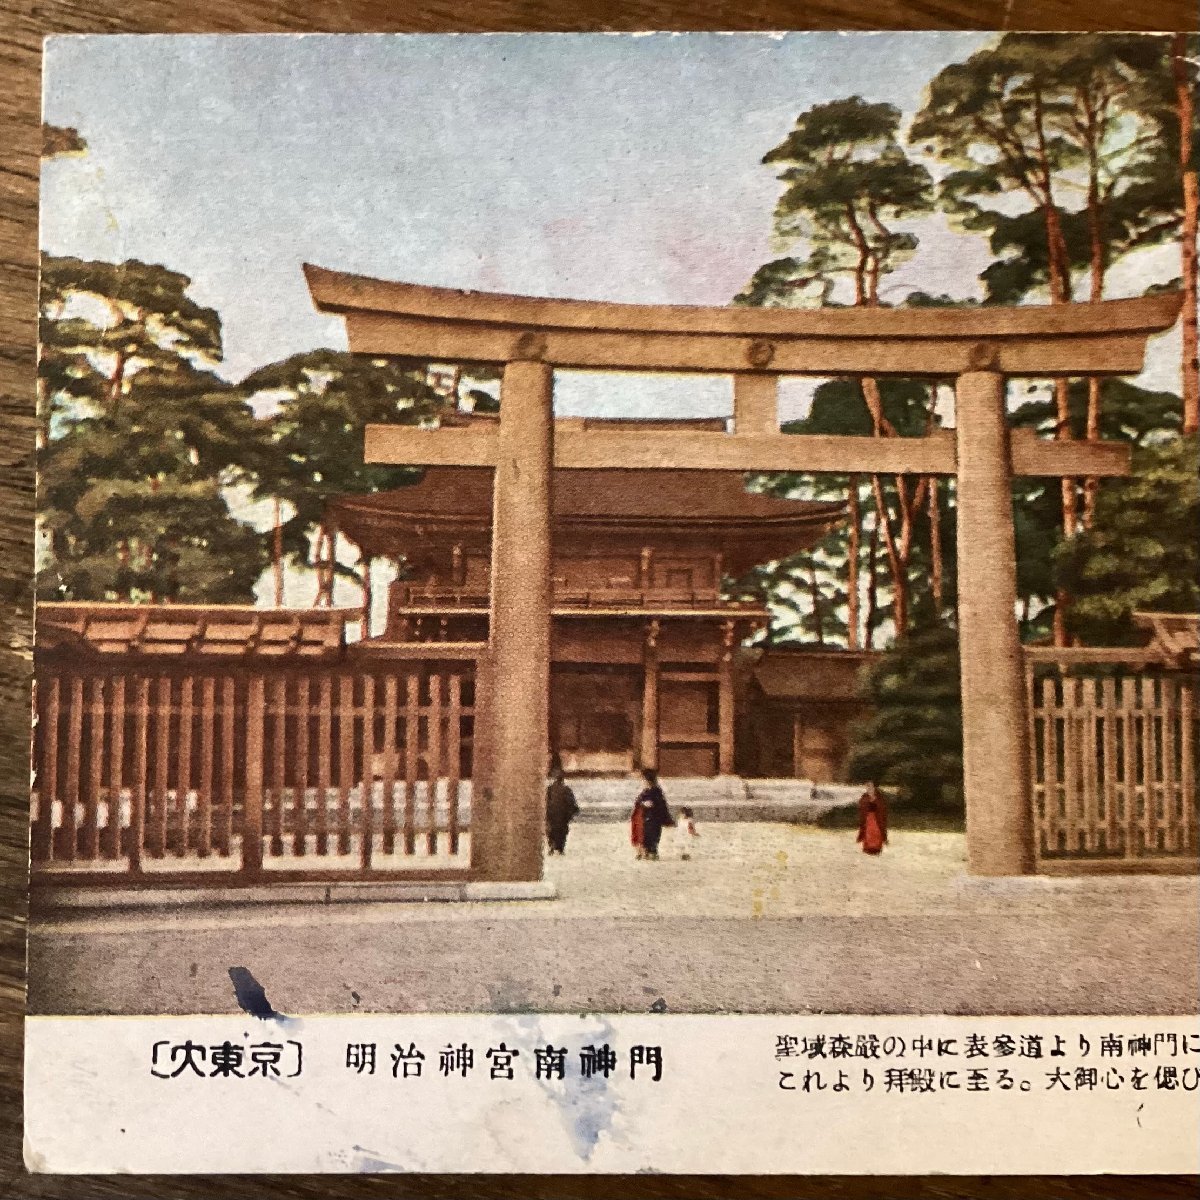 JJ-1893 # including carriage # Tokyo Metropolitan area Meiji god . south god . three road torii god company Japanese clothes three . customer sightseeing name place landscape painting picture postcard picture printed matter /.FU.